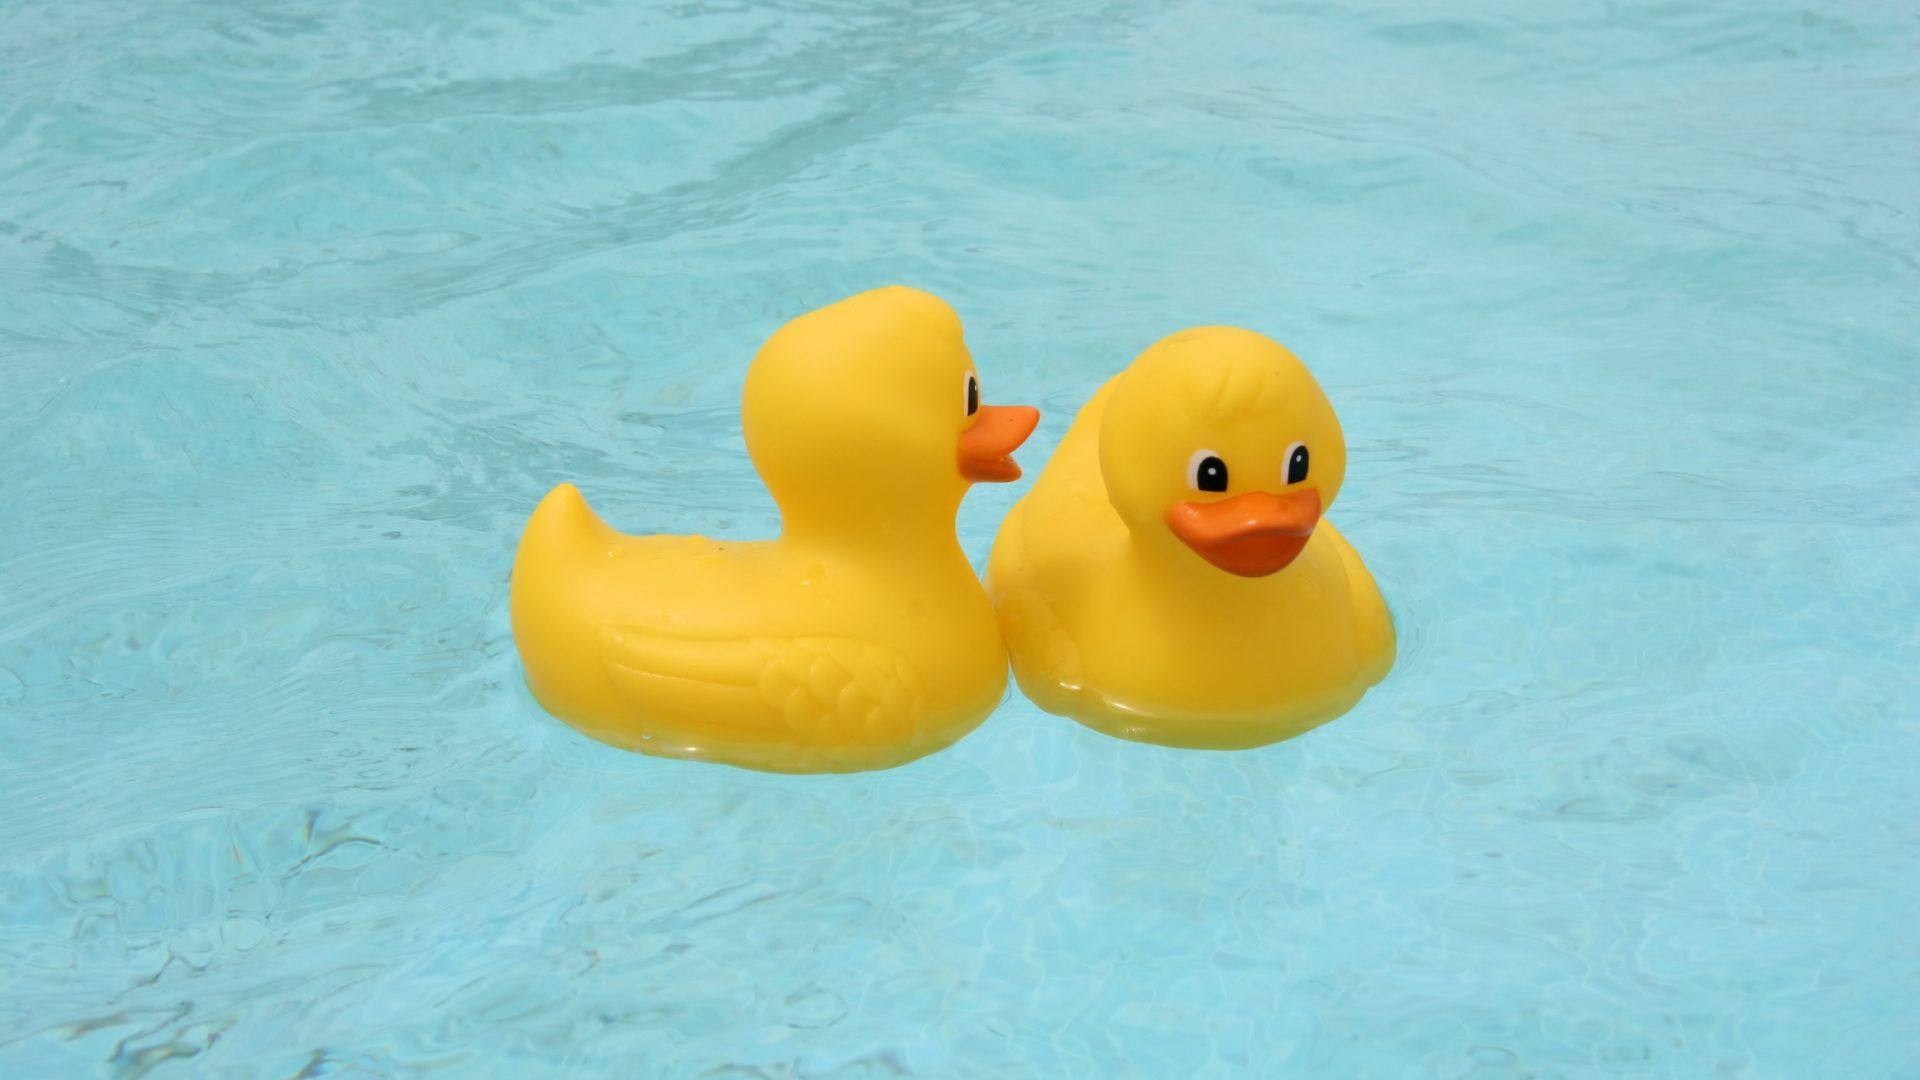 Fun Family Pool Games - Rubber Ducky Races